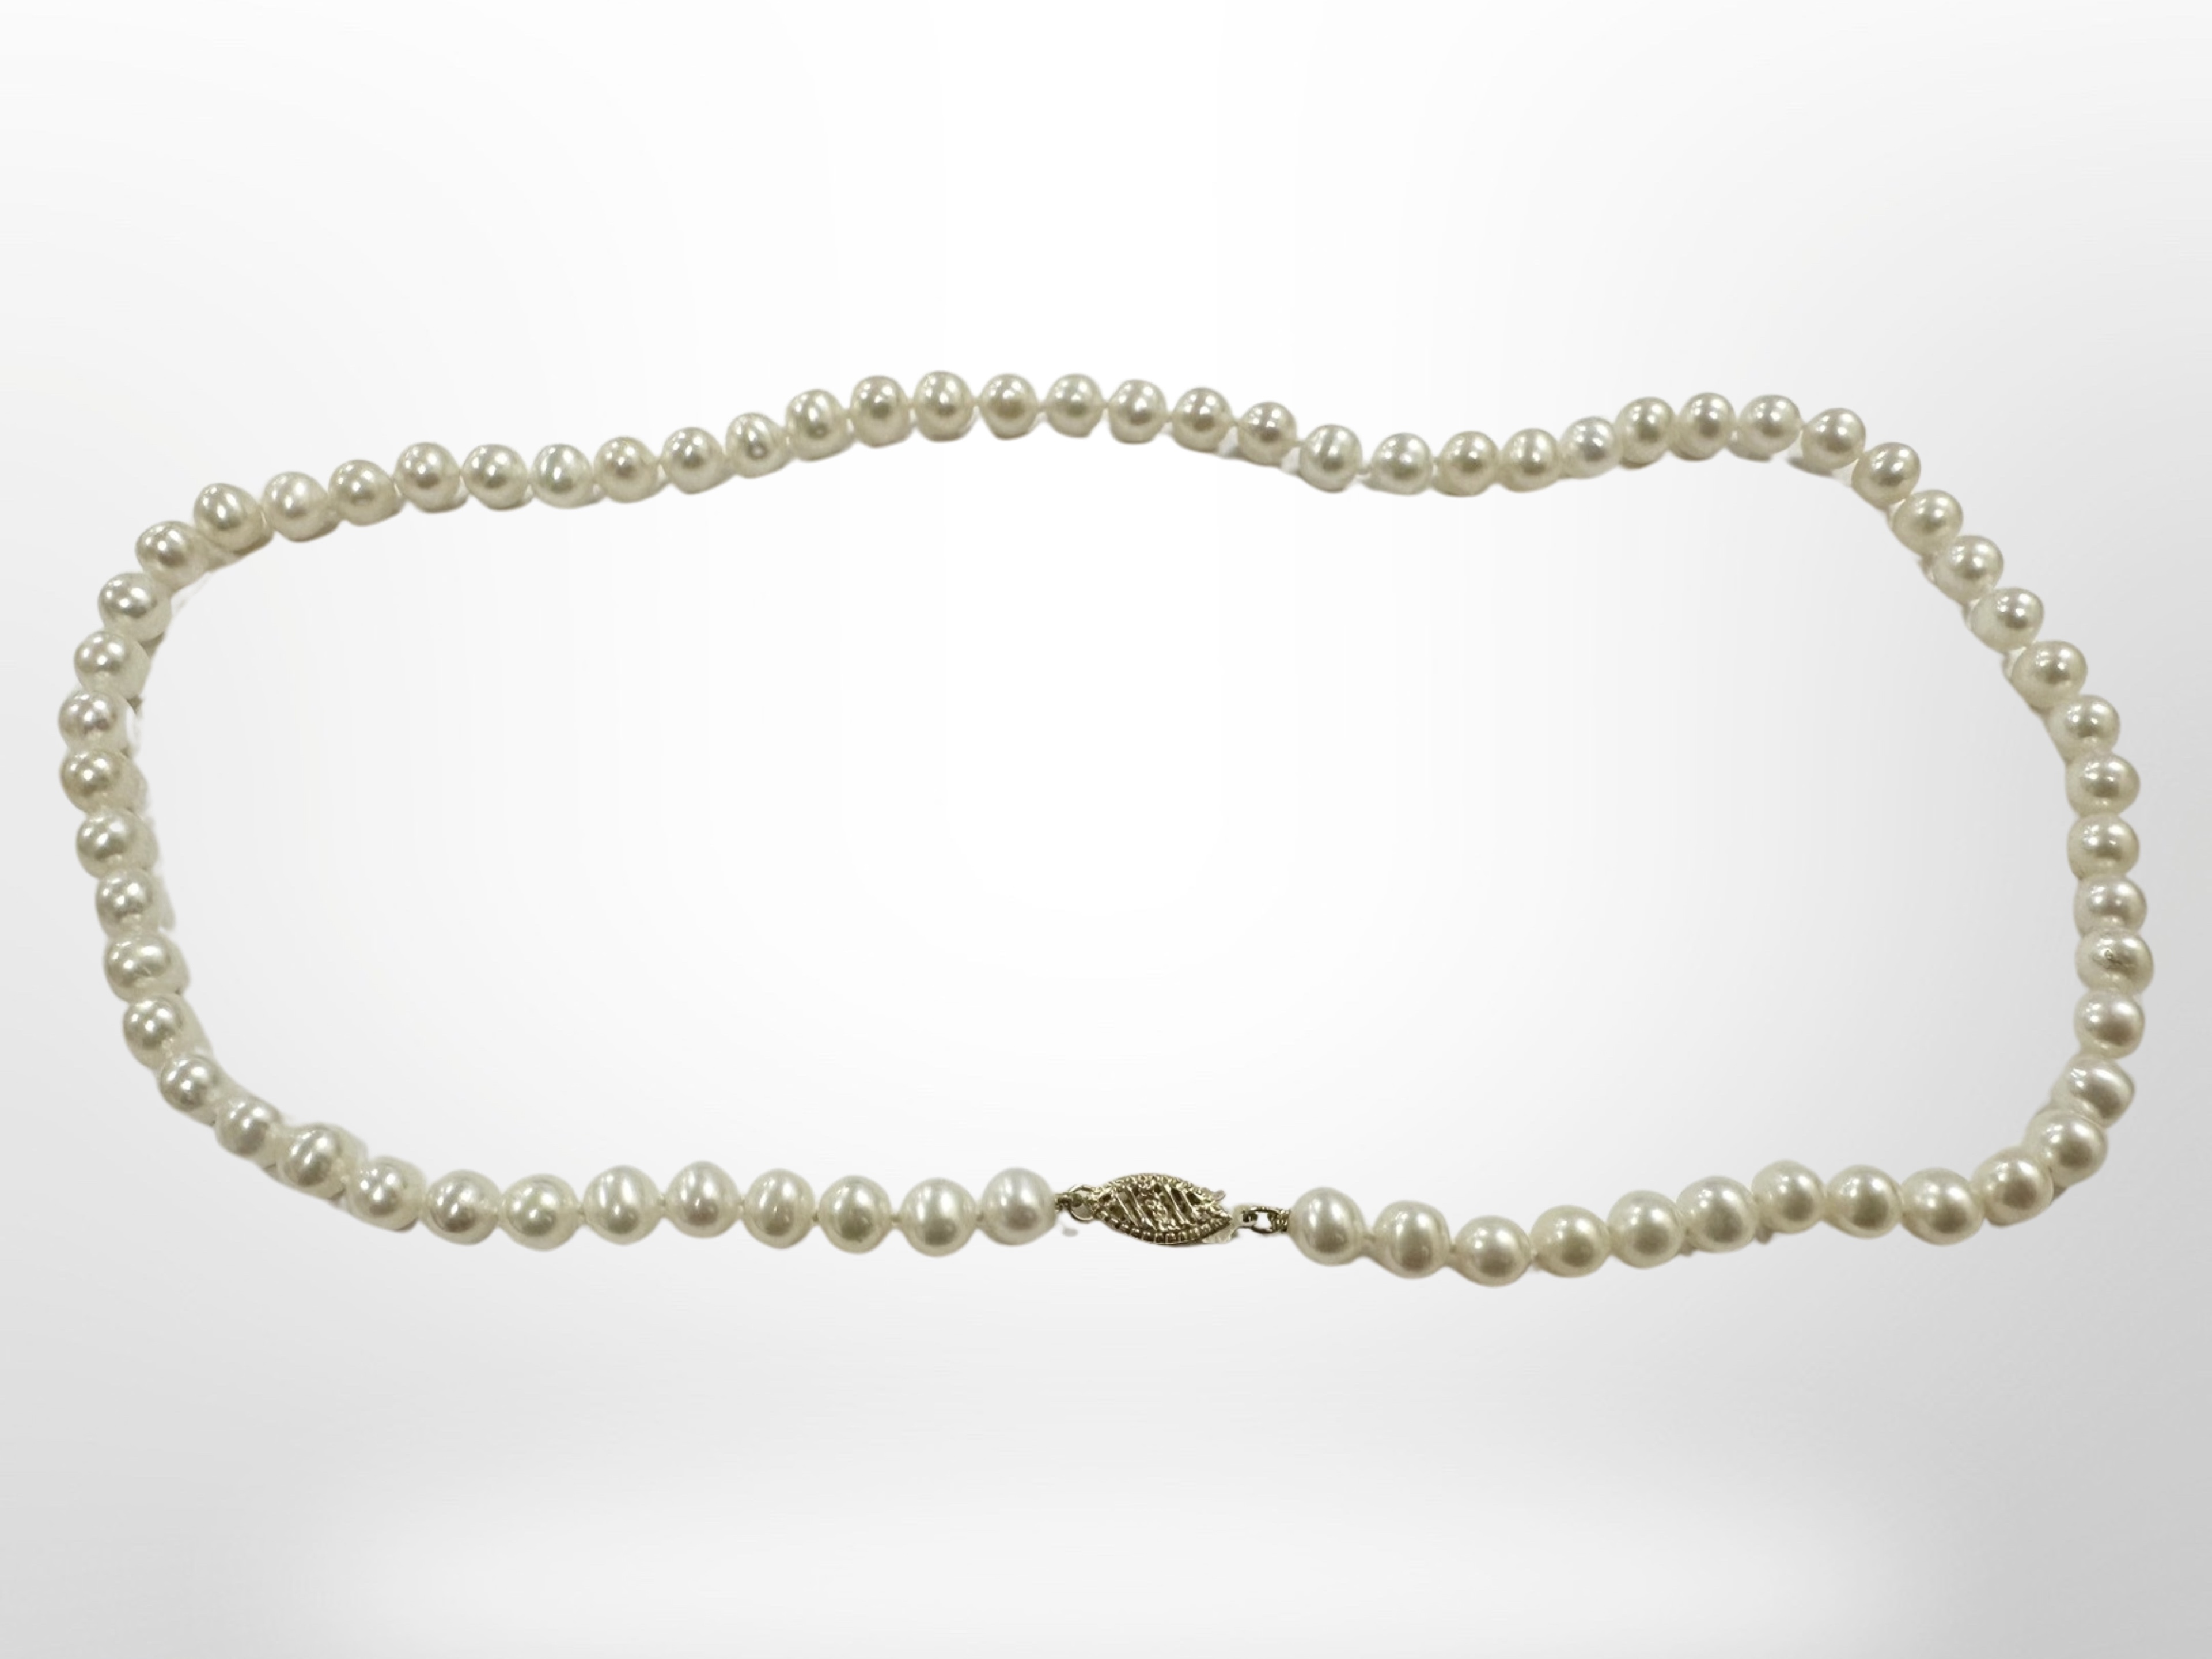 A cultured pearl necklace on 9ct yellow gold clasp, length 44 cm.